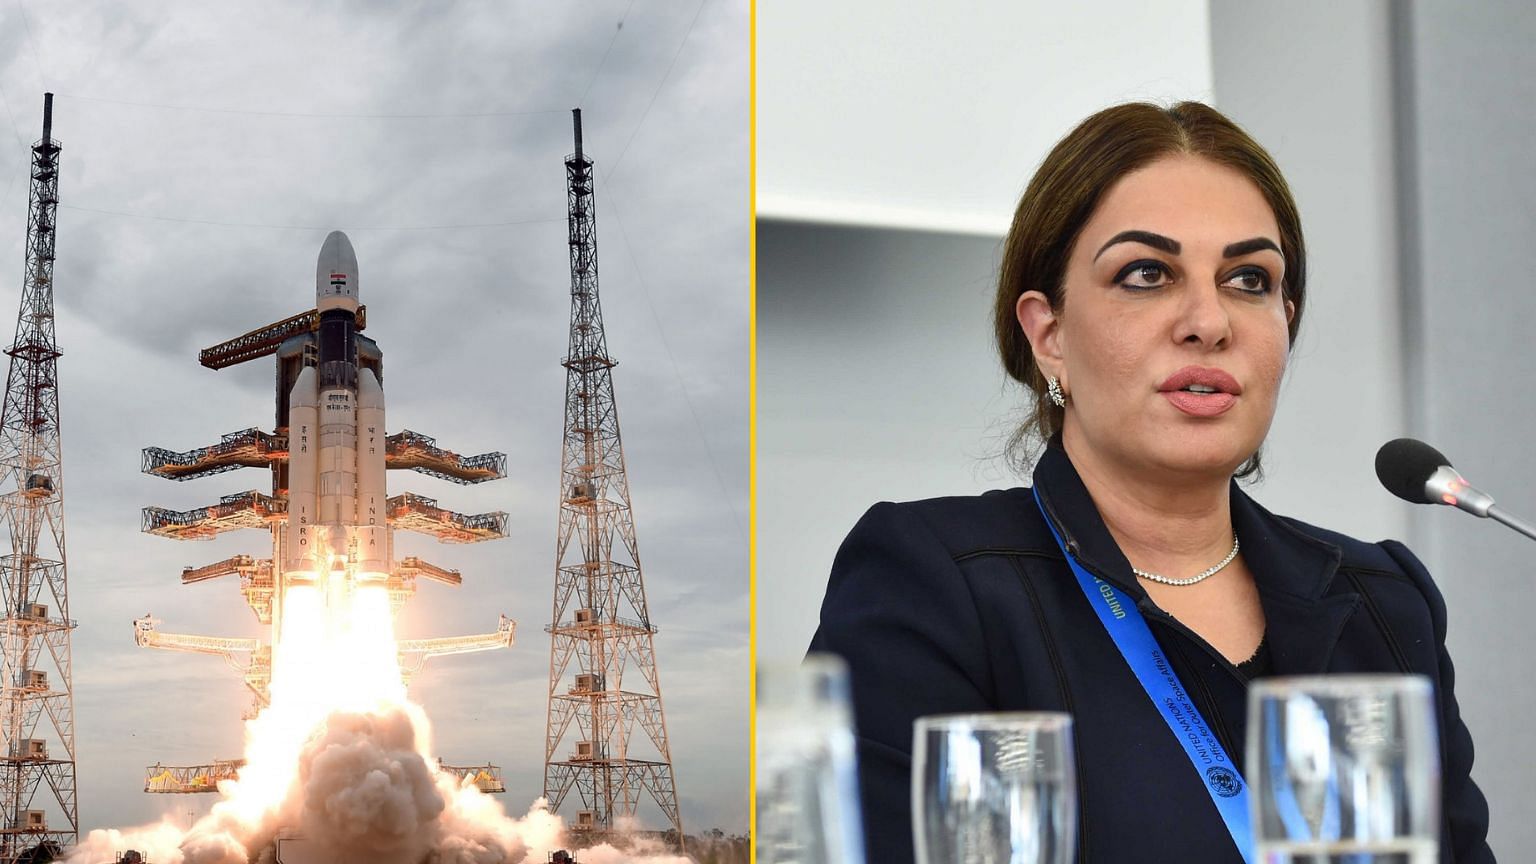 Namira Salim, Pakistan’s first female astronaut, has congratulated Indian Space and Research Organisation (ISRO) on the Chandrayaan-2 mission.